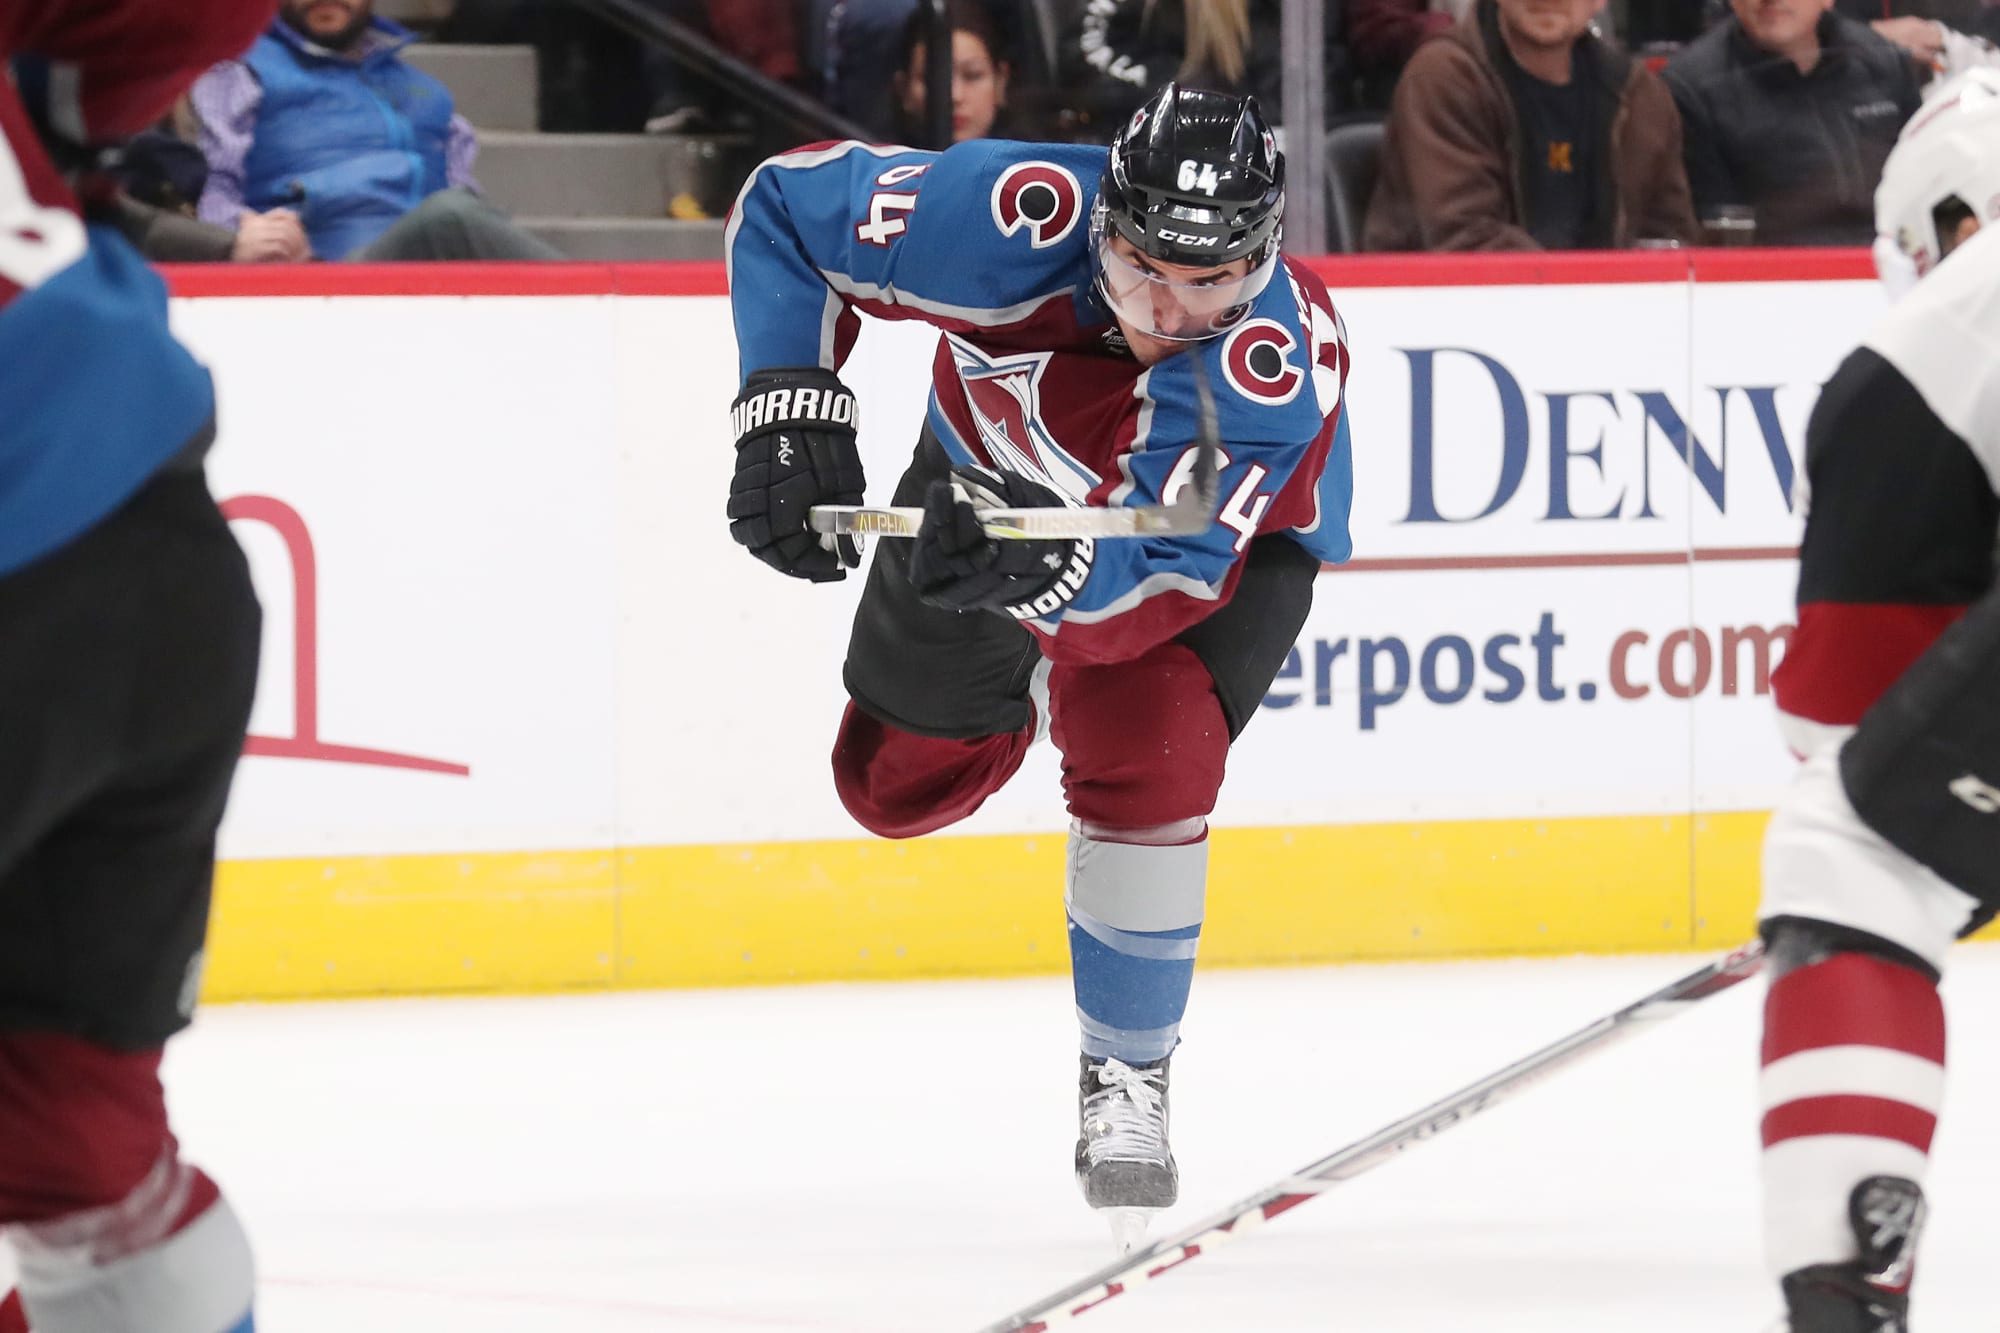 6. Avalanche's gamble on Nail Yakupov pays off - wide 5